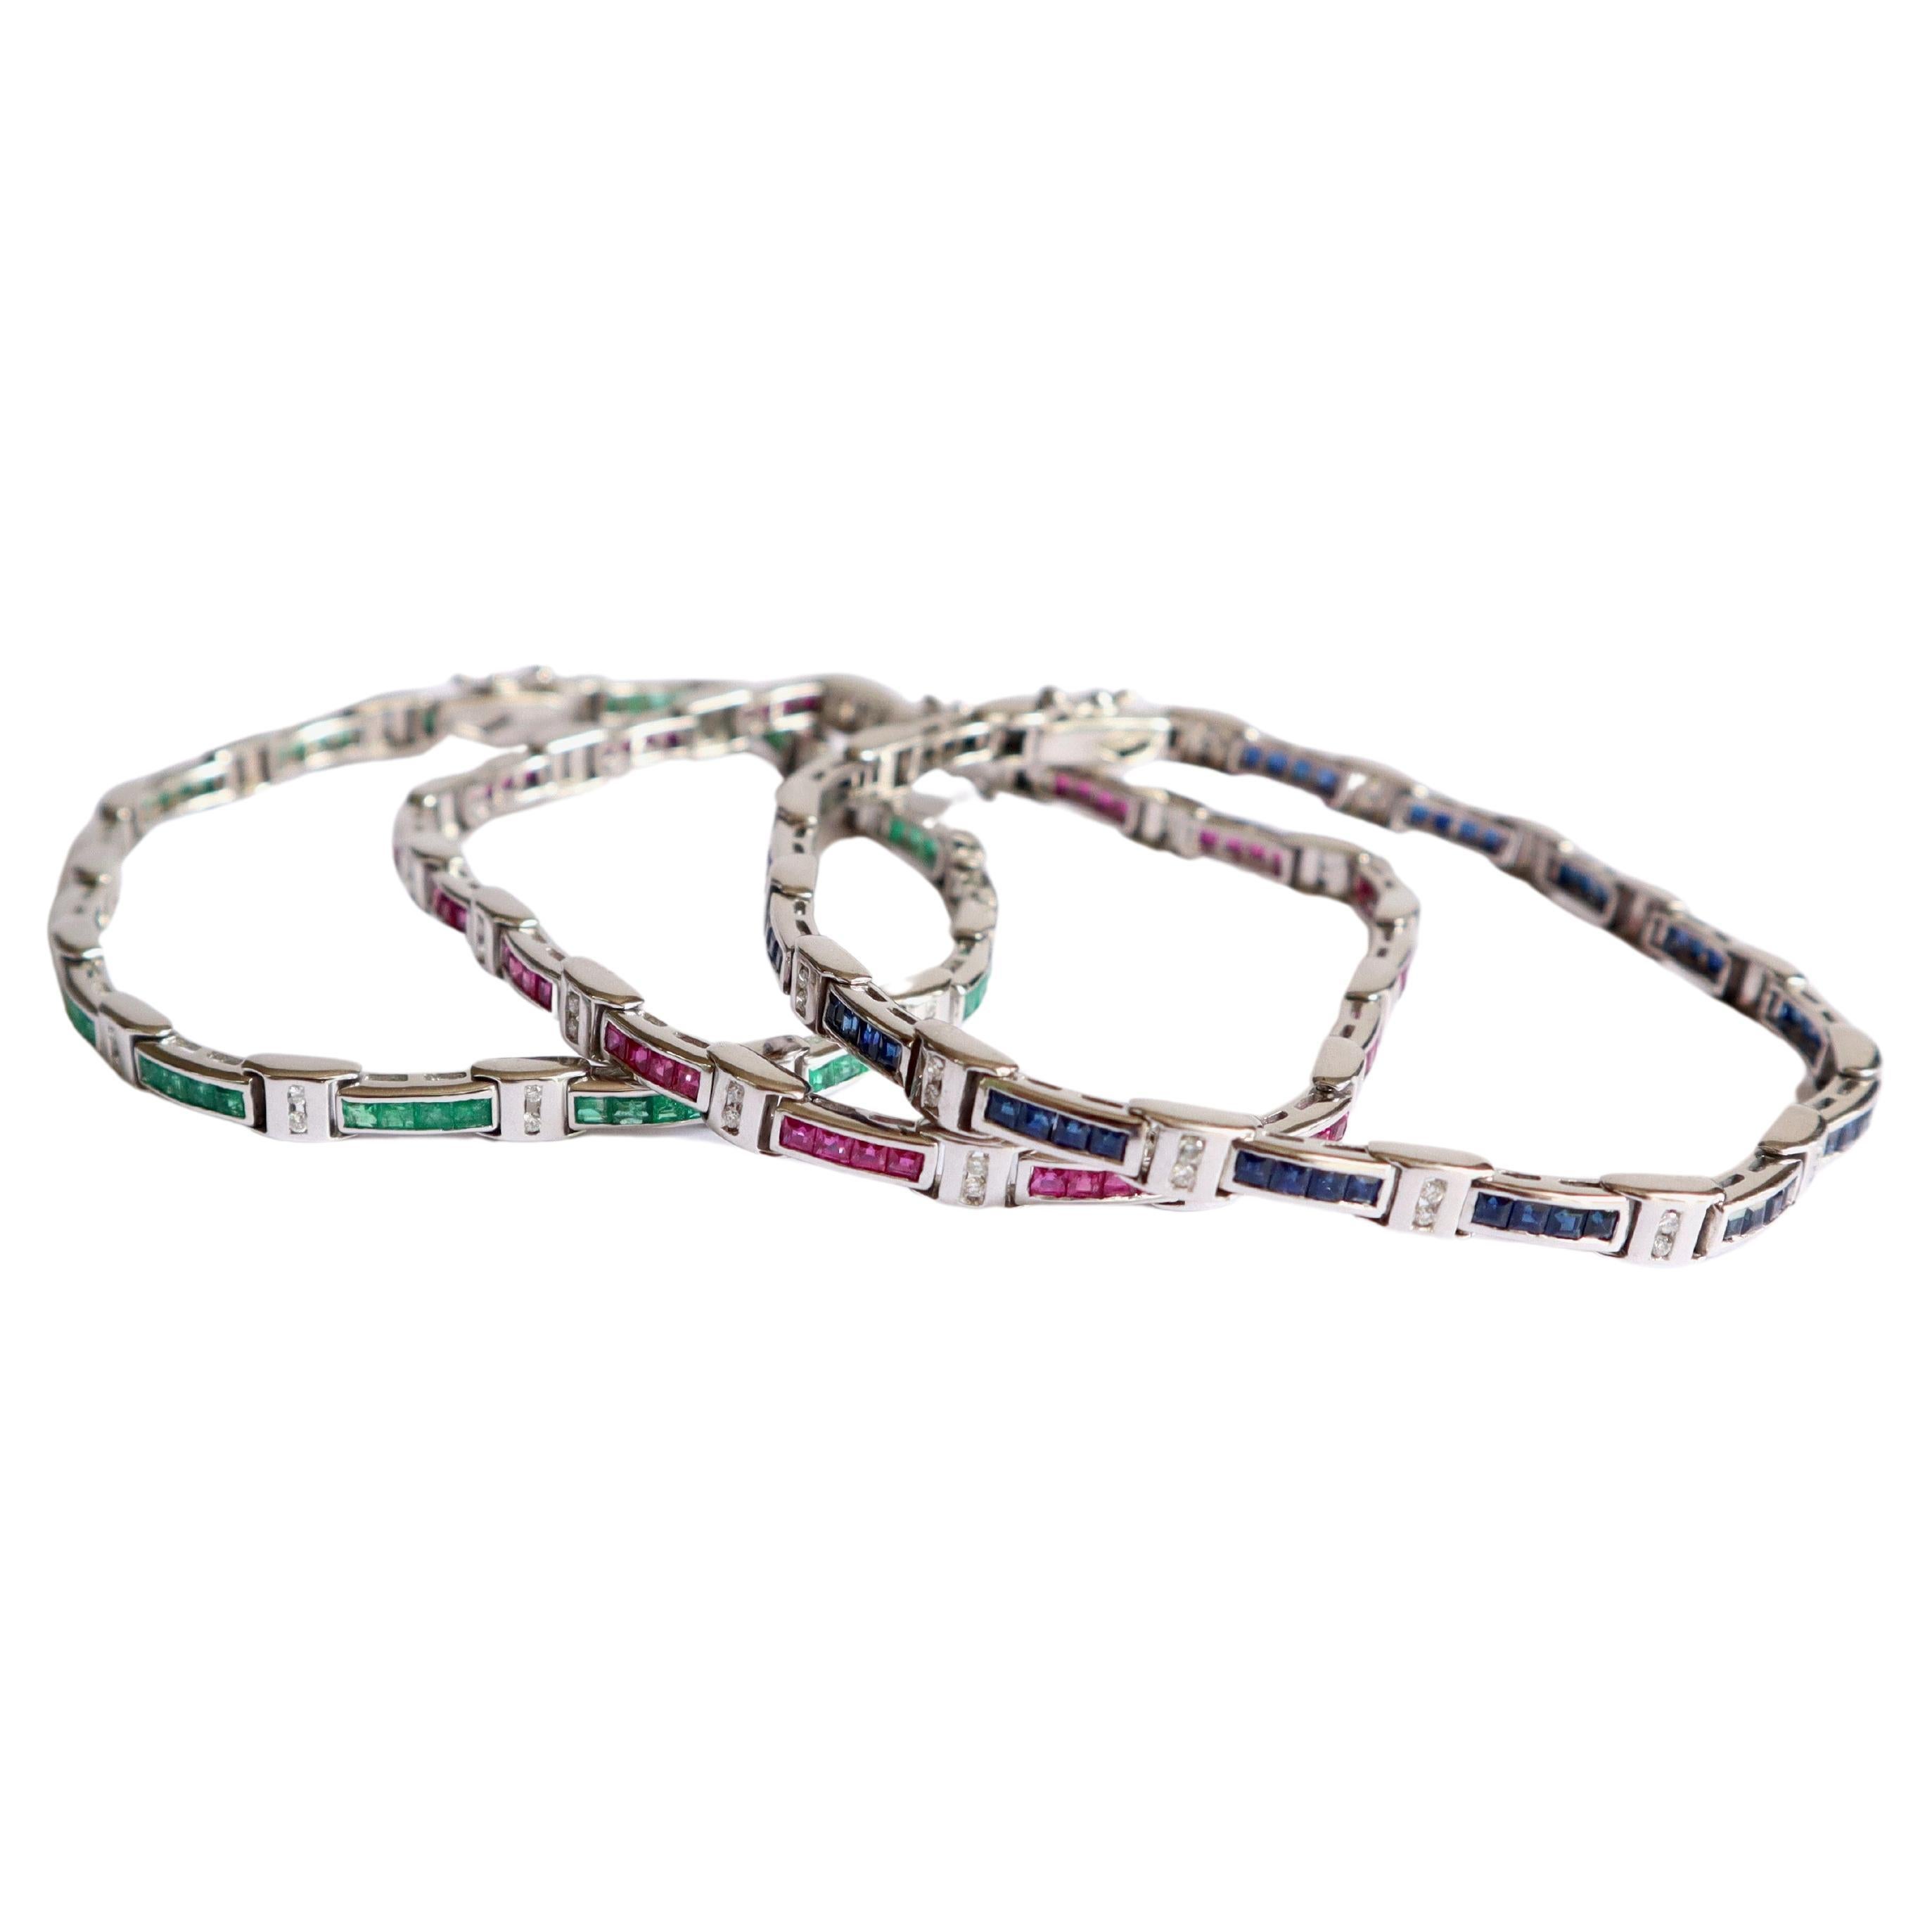 Set of 3 Bracelets in 18 Kt White Gold, Rubies, Emeralds, Sapphires and Diamonds For Sale